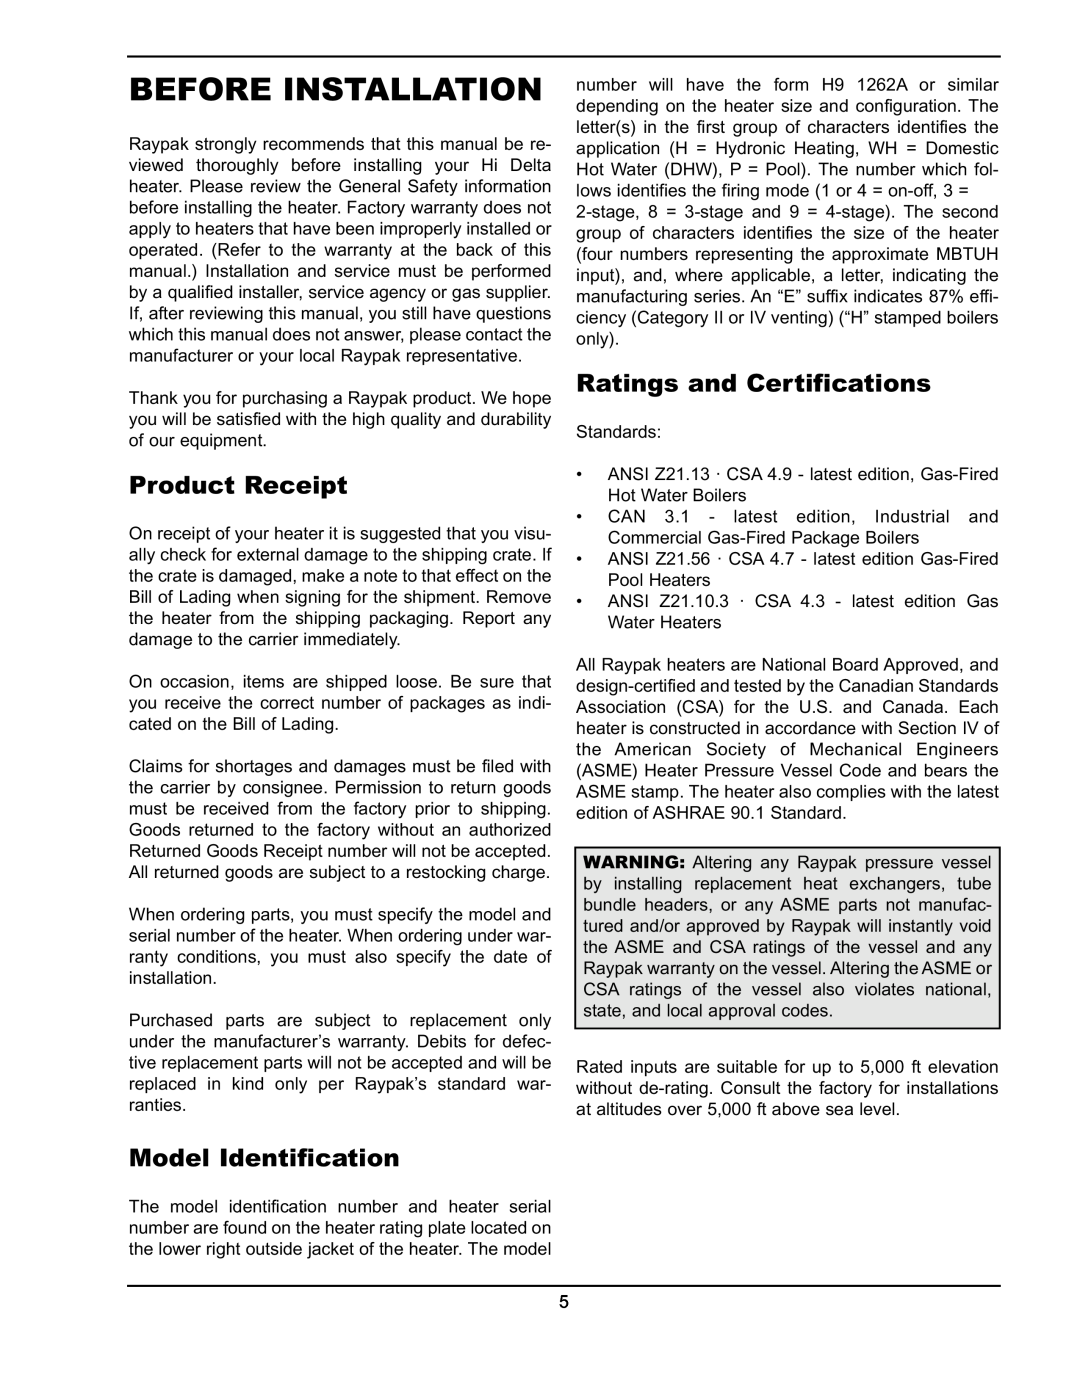 Raypak 302A-902A manual Before Installation, Product Receipt, Model Identification, Ratings and Certifications 